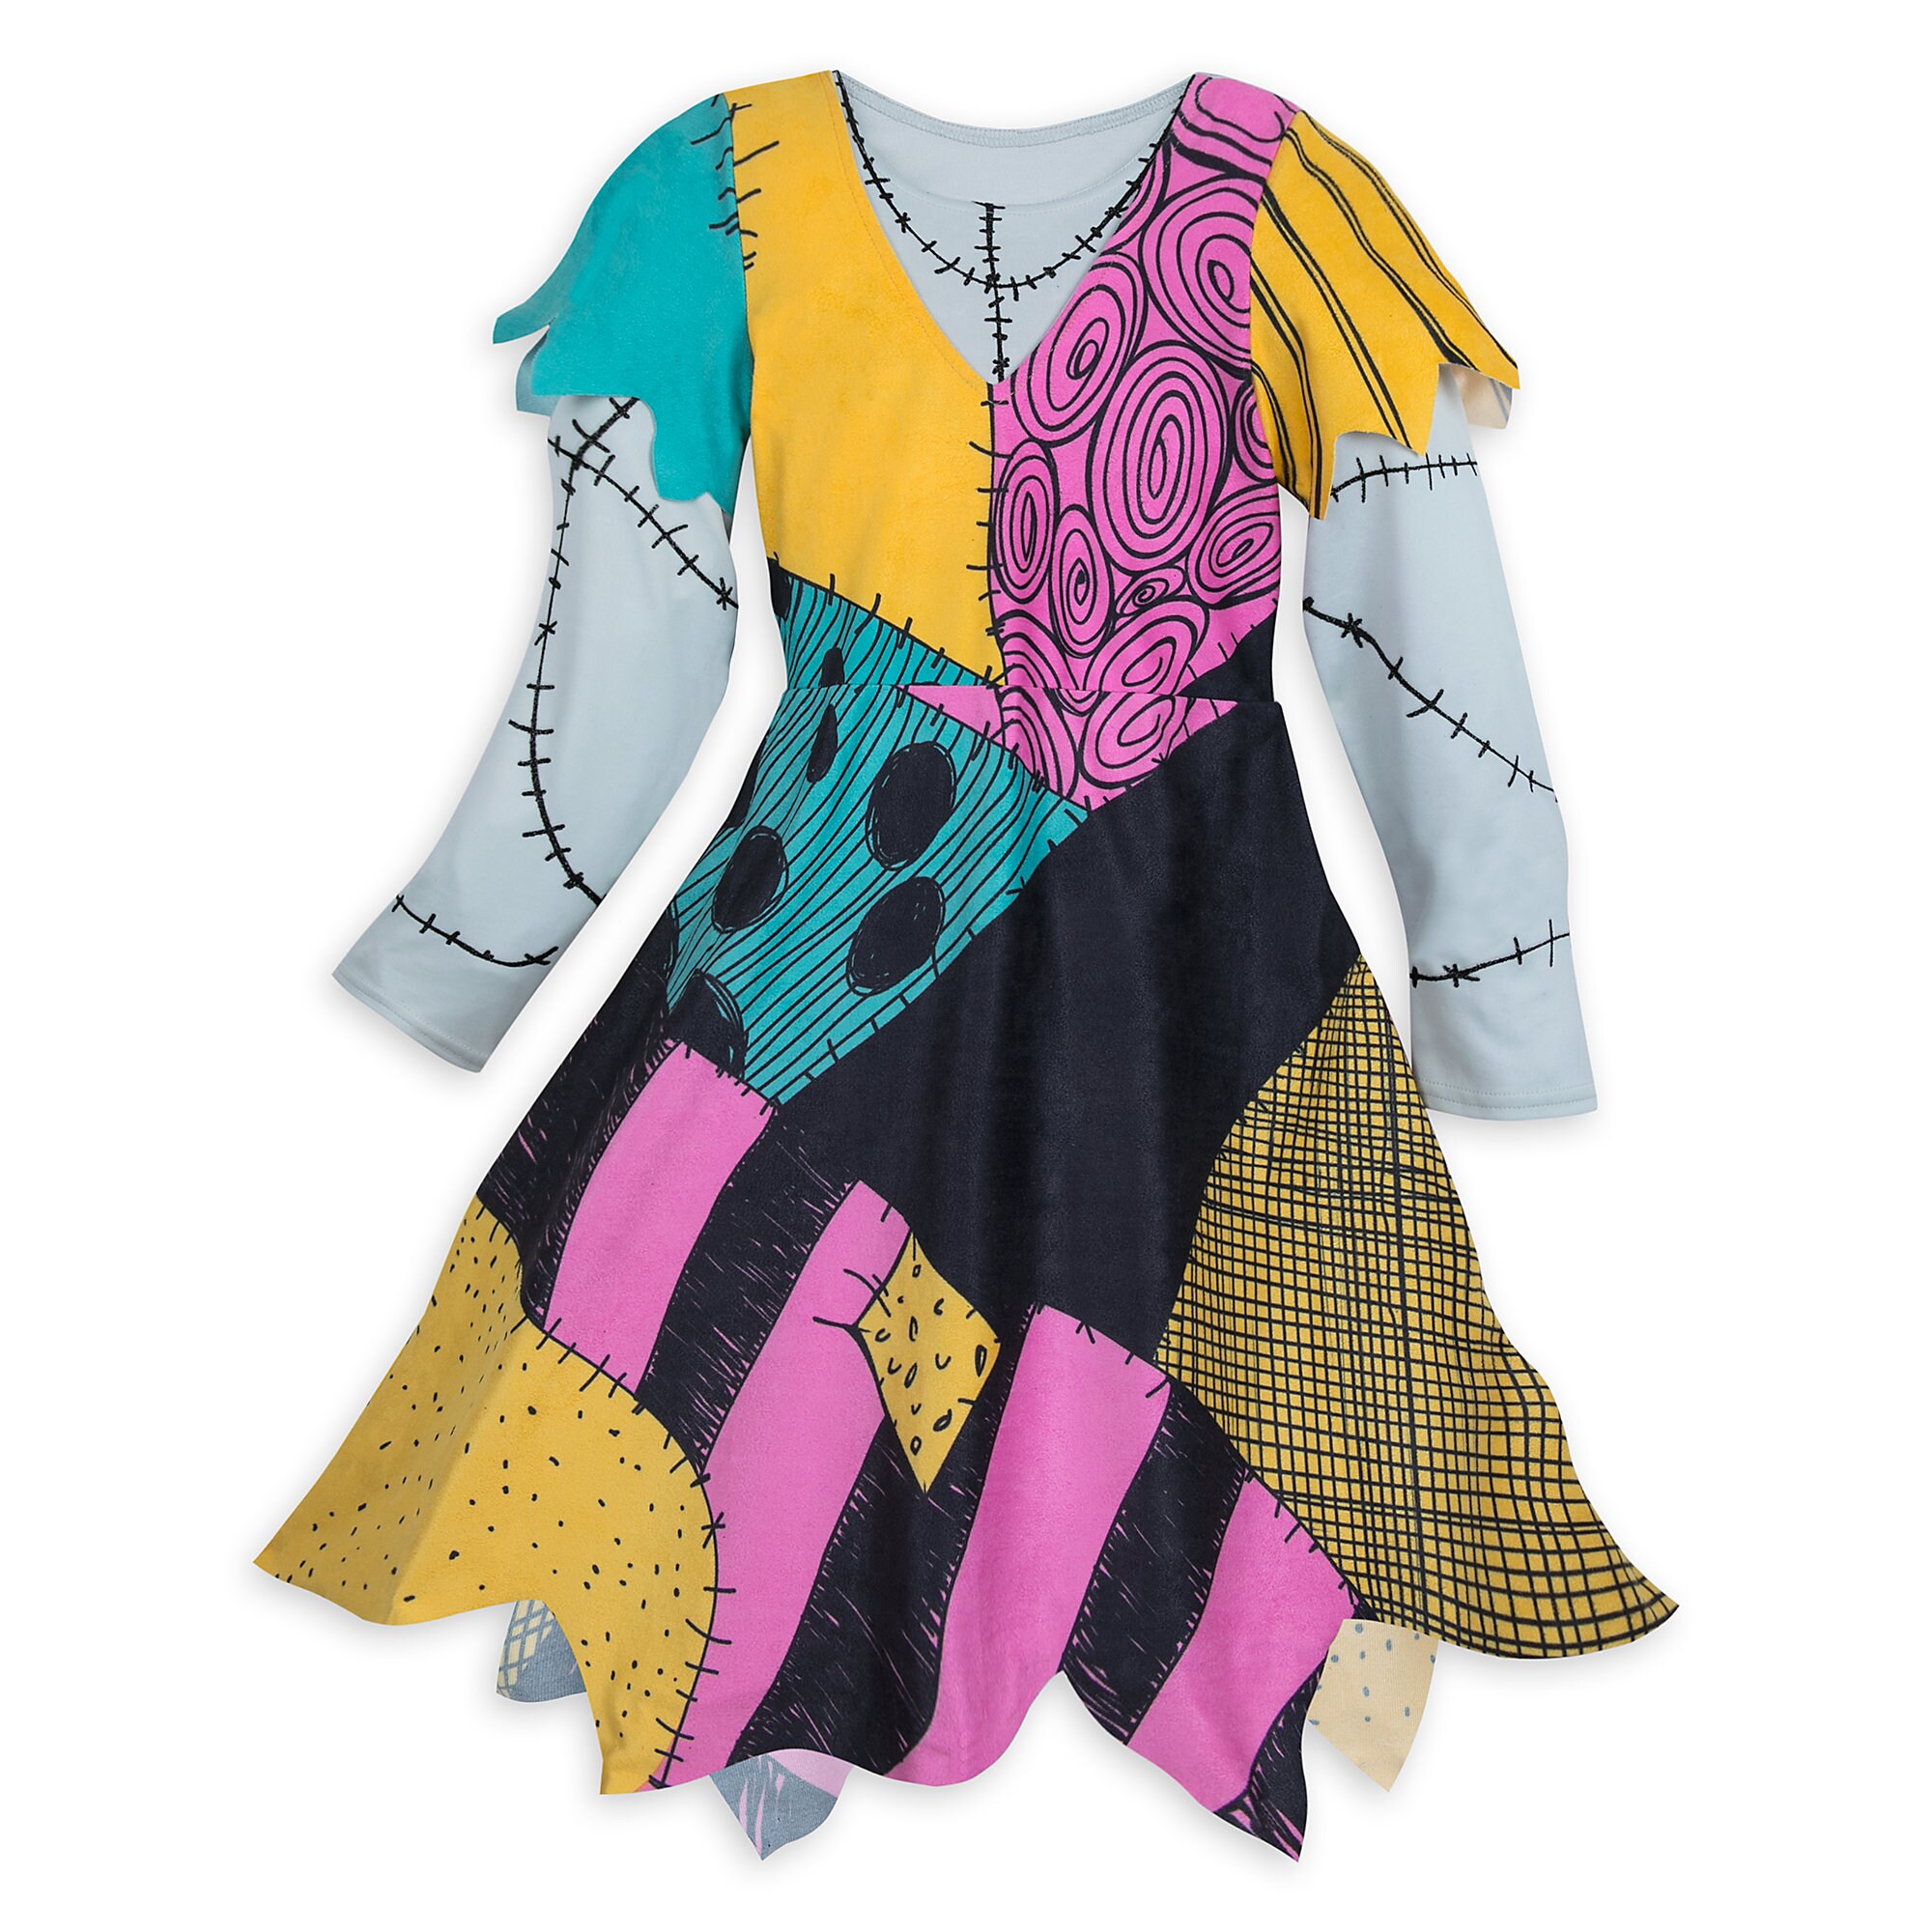 Sally Costume for Kids - The Nightmare Before Christmas